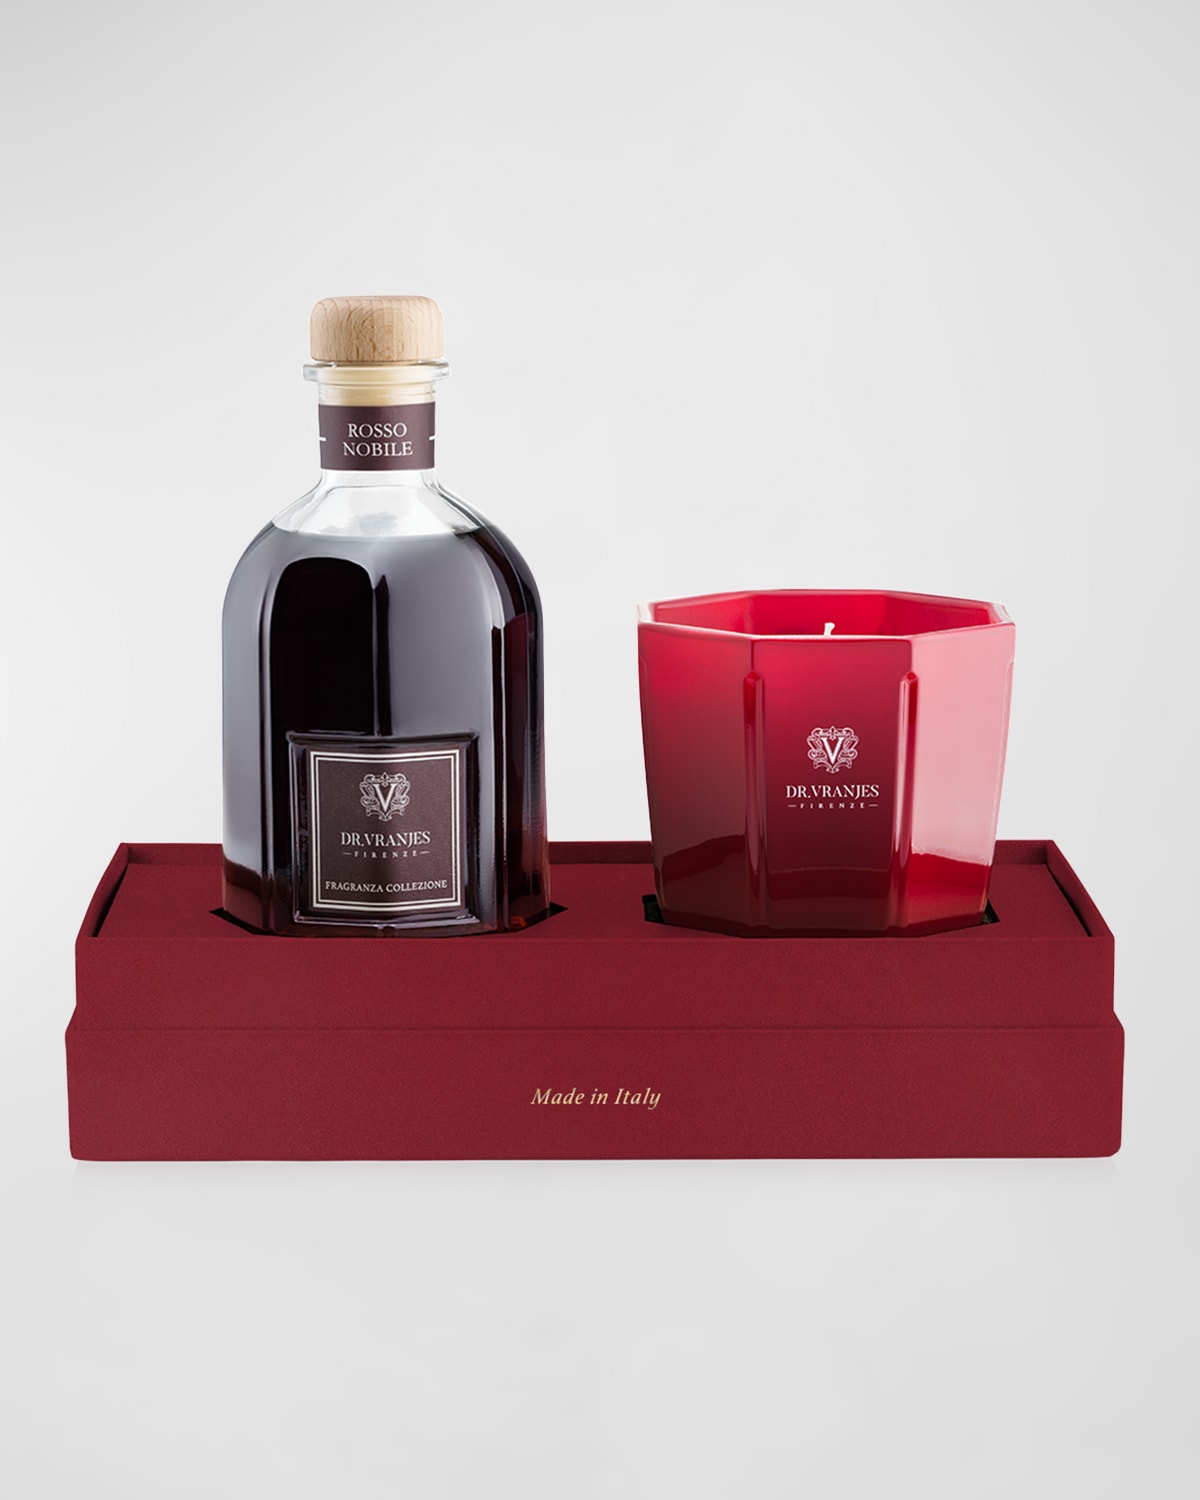 Dr. Vranjes Firenze Rosso Nobile 8.4 oz. Diffuser and Candle Holiday Gift Set